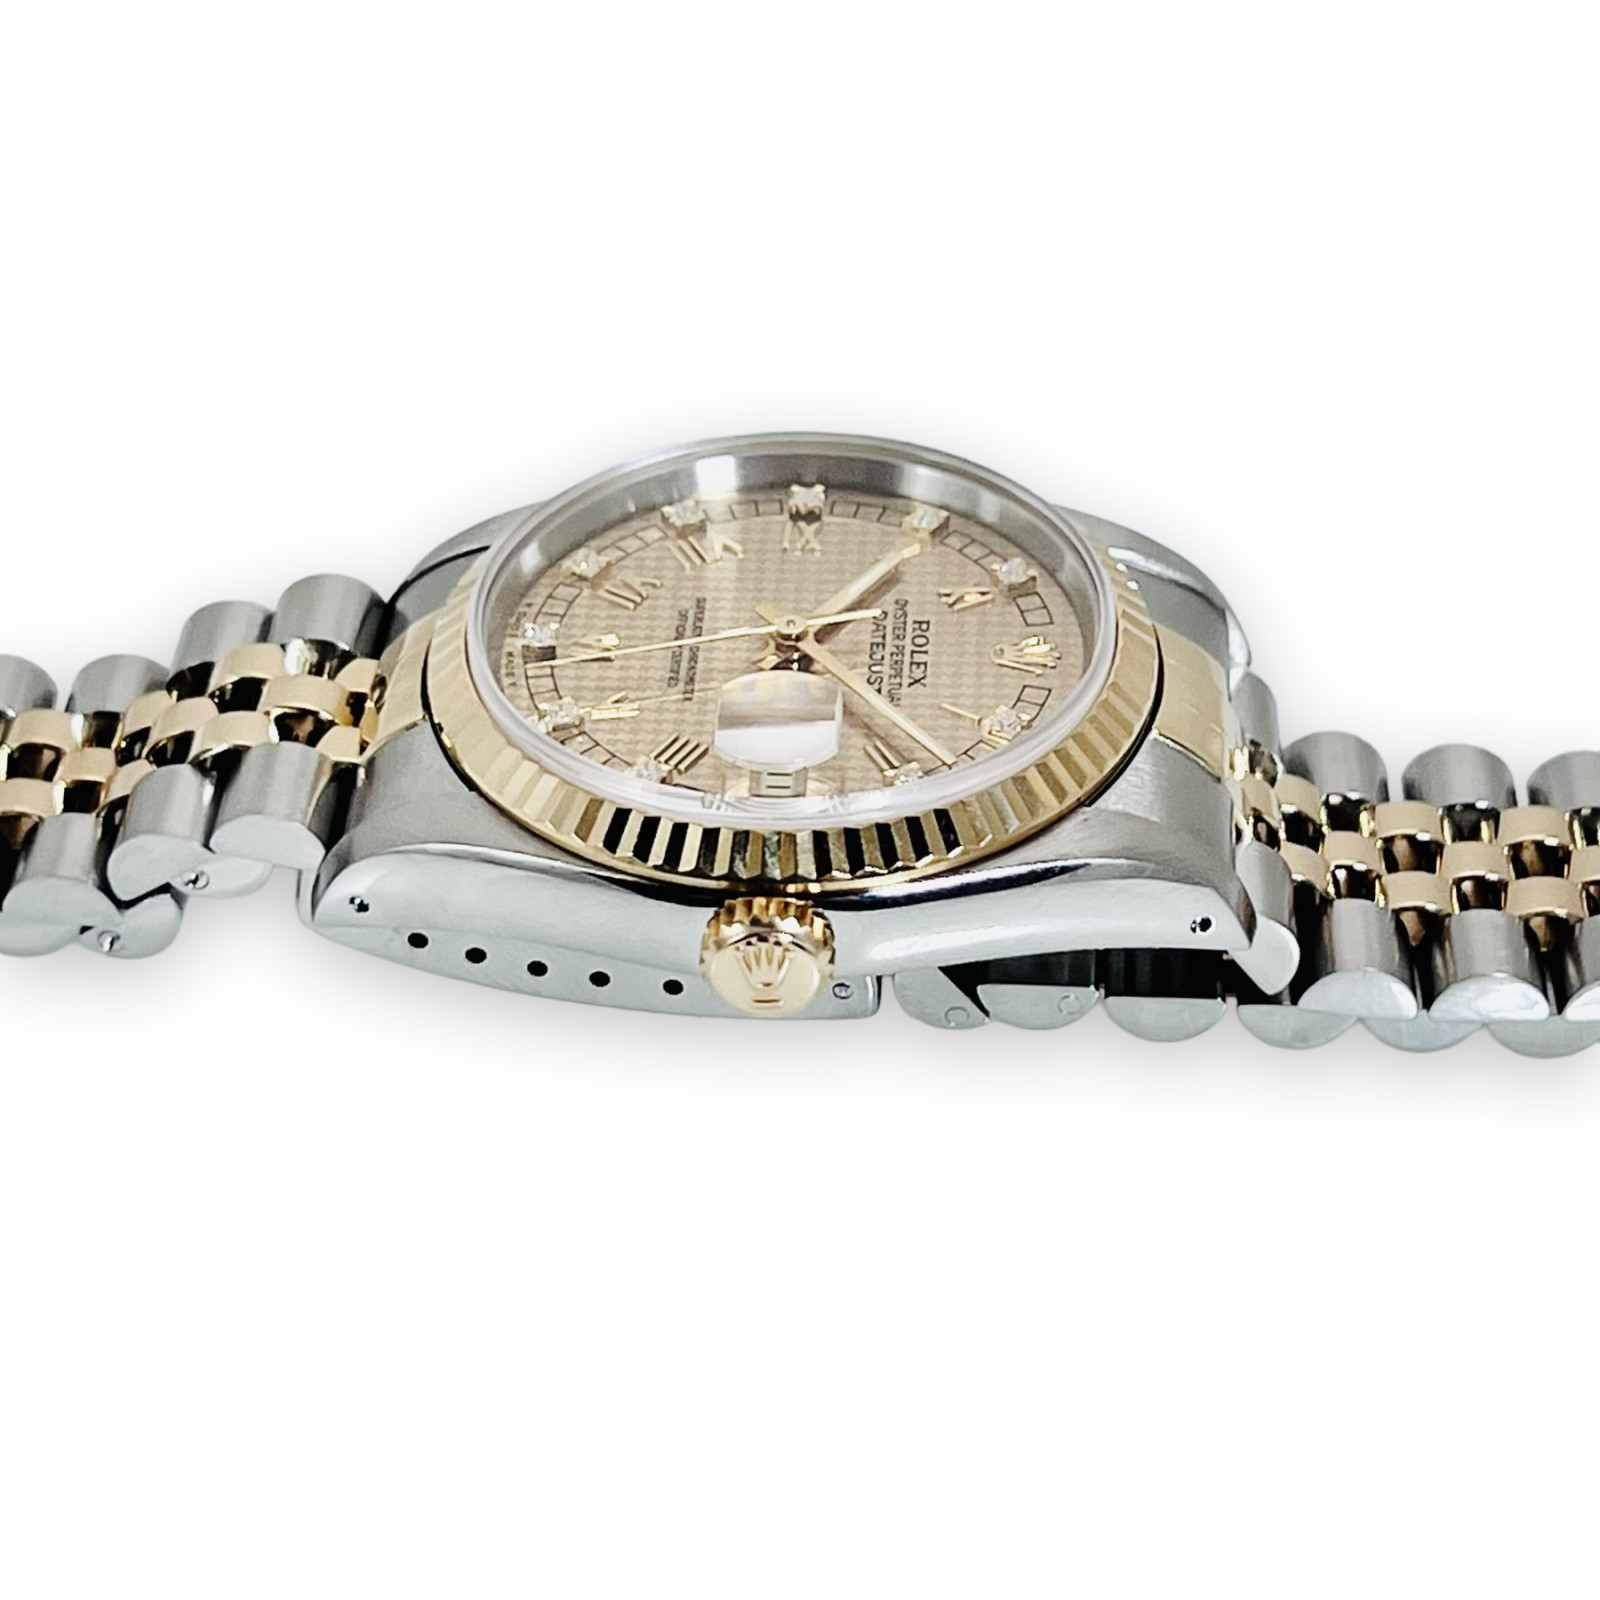 Rolex Datejust 16233 with Houndstooth Dial